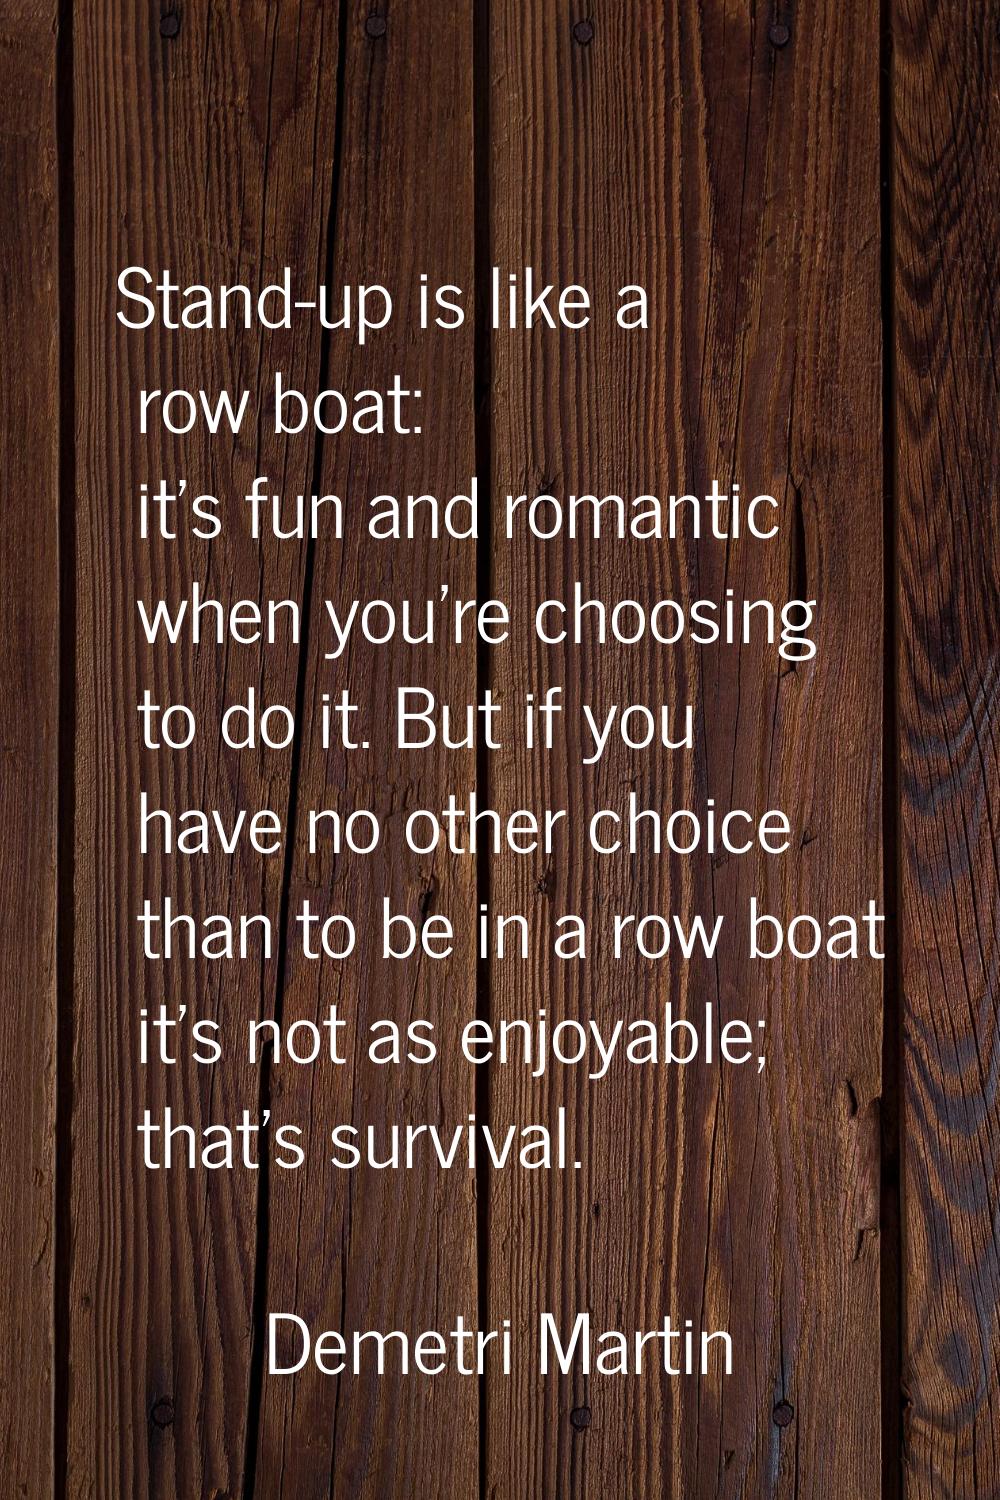 Stand-up is like a row boat: it's fun and romantic when you're choosing to do it. But if you have n